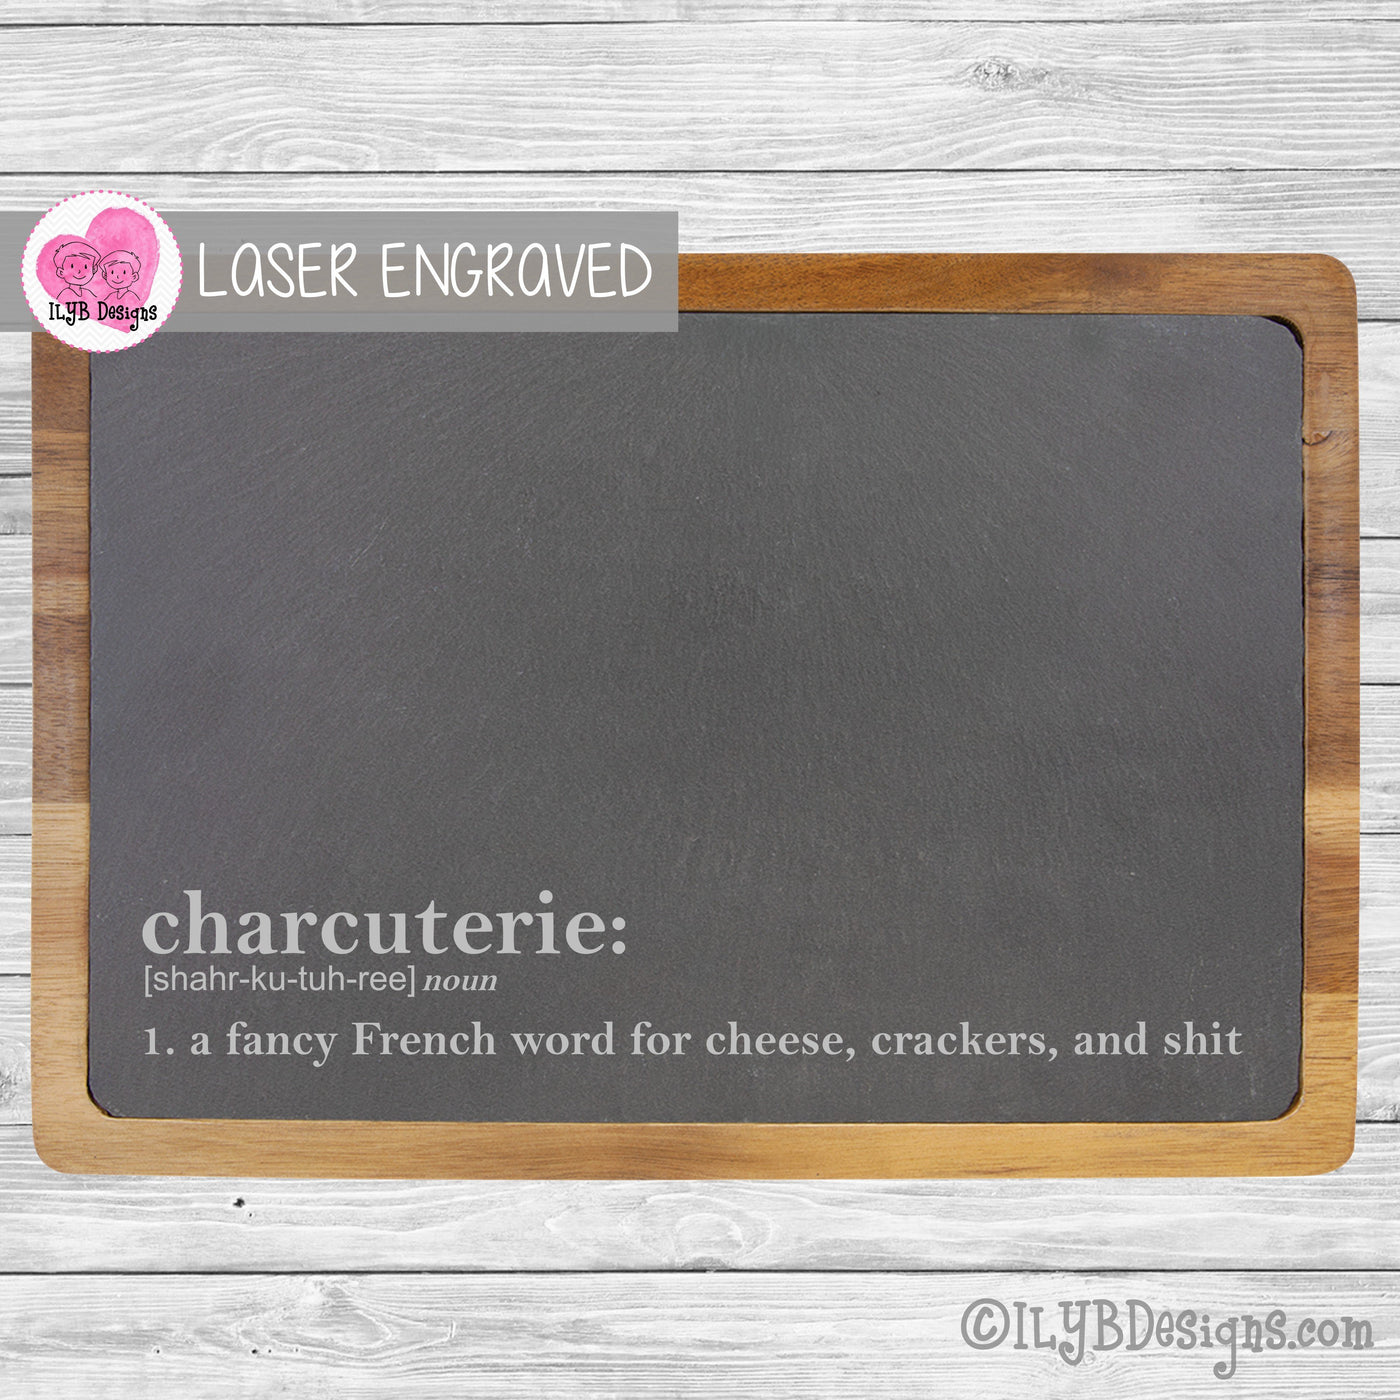 13"x9" rectangle solid acacia wood with slate insert cutting or cheese board. It is custom laser engraved with the funny definition of the word charcuterie. Written like a dictionary definition, it reads, "a fancy French word for cheese, crackers, and shit."